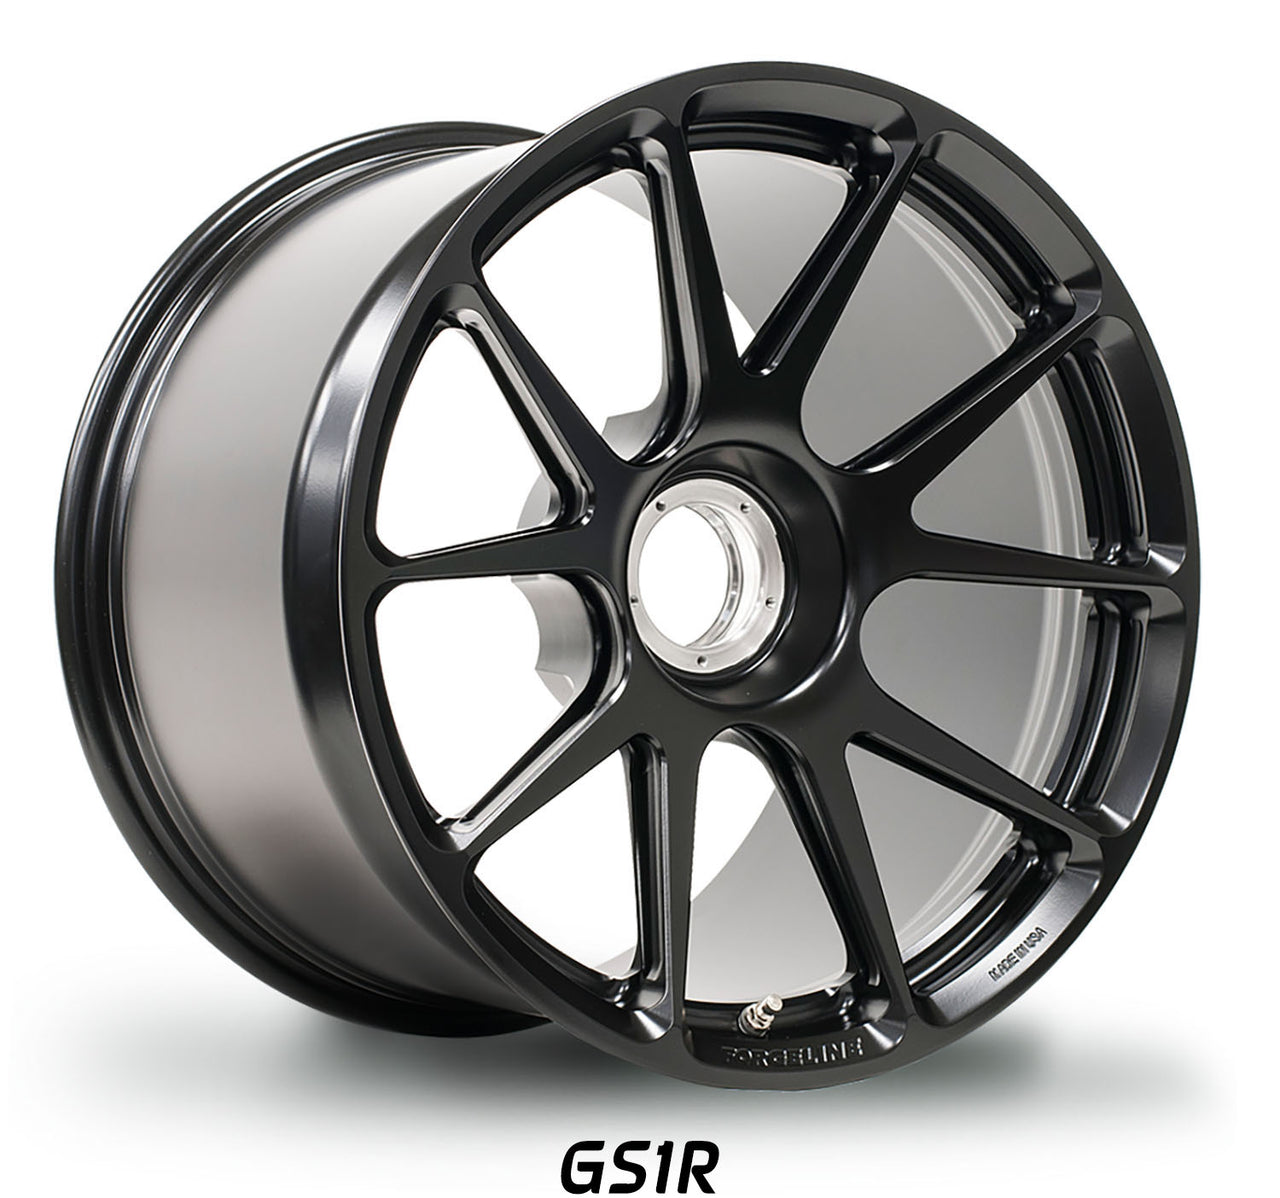 GS1R Porsche Center Lock from Forgeline Motorsports Series in Satin Black finish for 992 Porsche GT3 RS the perfect wheel for Drivers Education, Track Days, and Racing